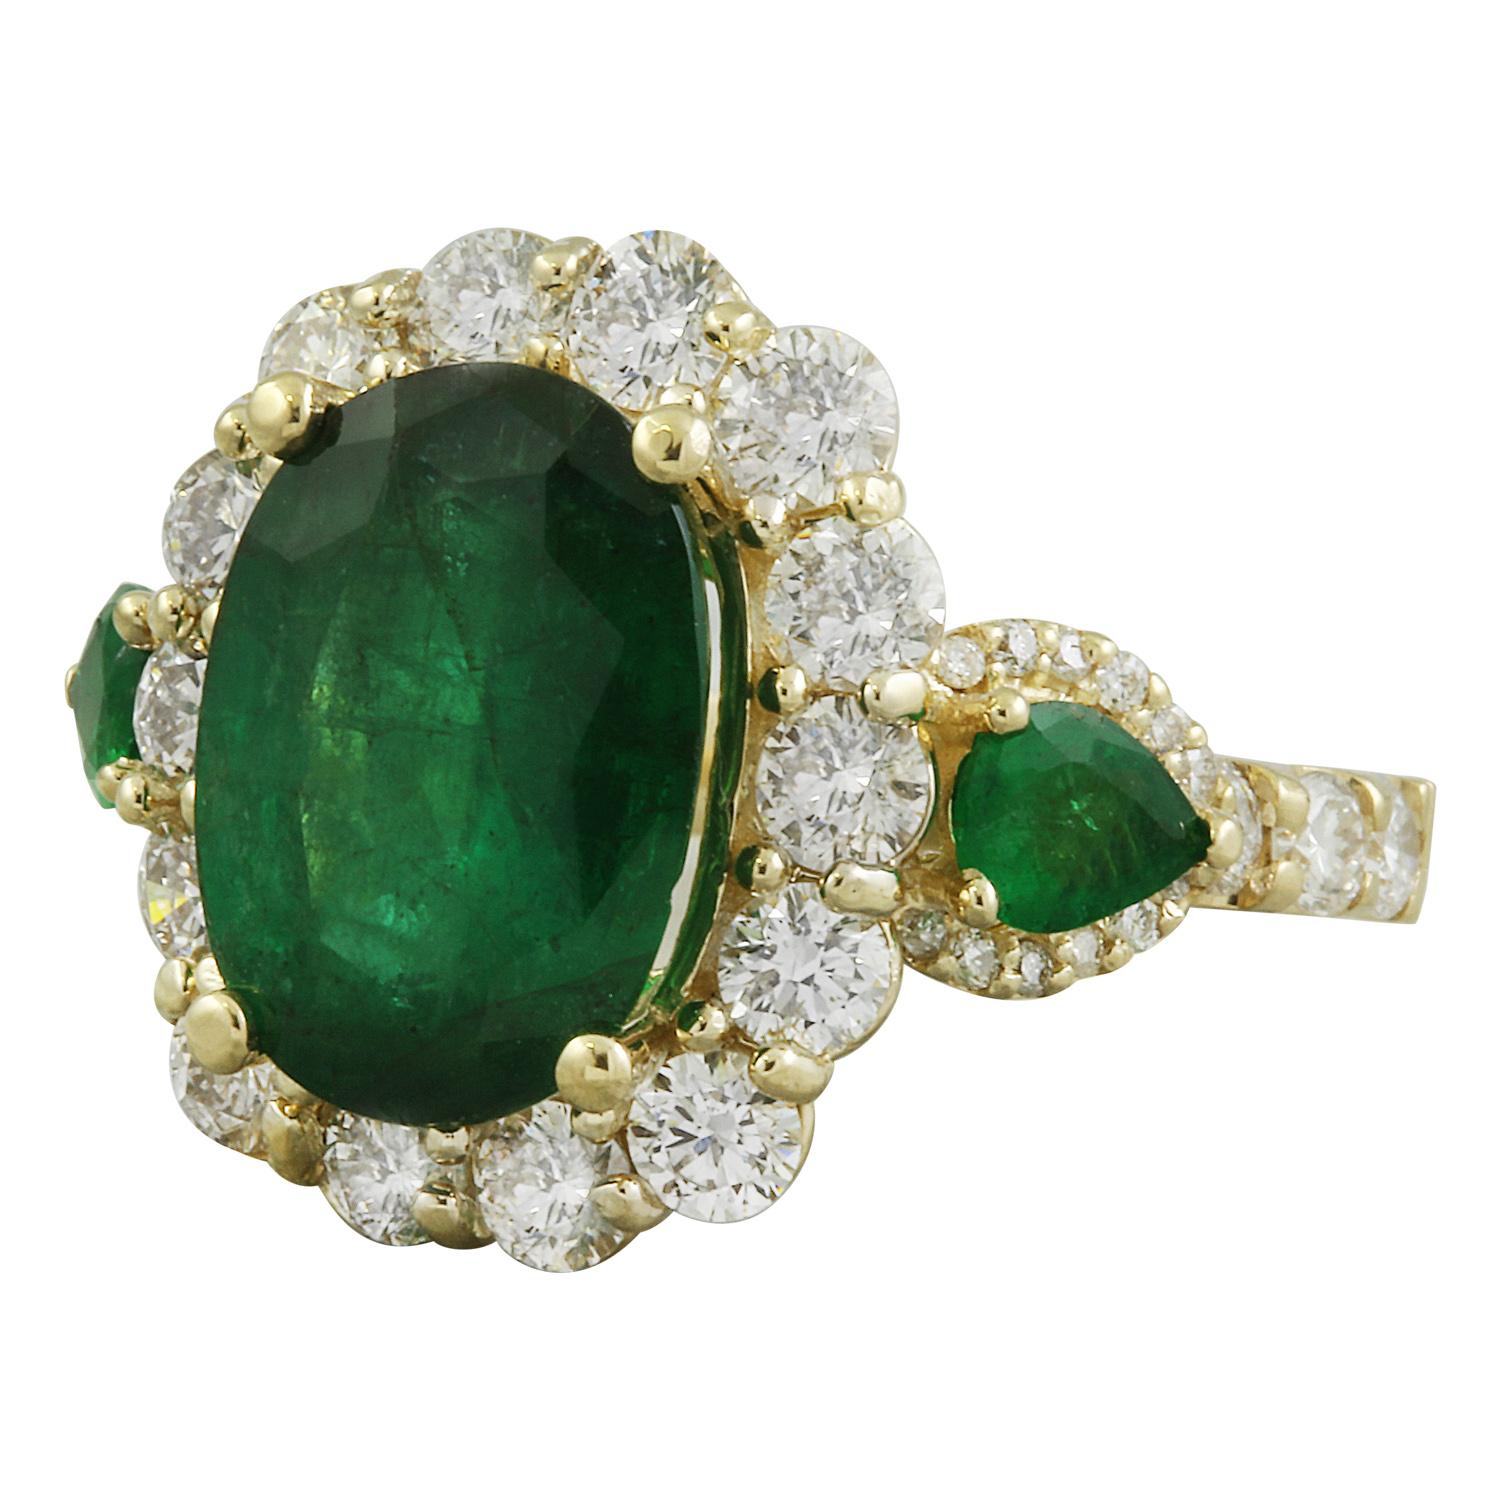 

Introducing our stunning 6.00 Carat Natural Emerald Ring crafted in luxurious 14K Solid Yellow Gold. This exquisite piece features a captivating center emerald weighing 3.90 Carats, cut in an elegant oval shape measuring 12.00x10.00 millimeters.